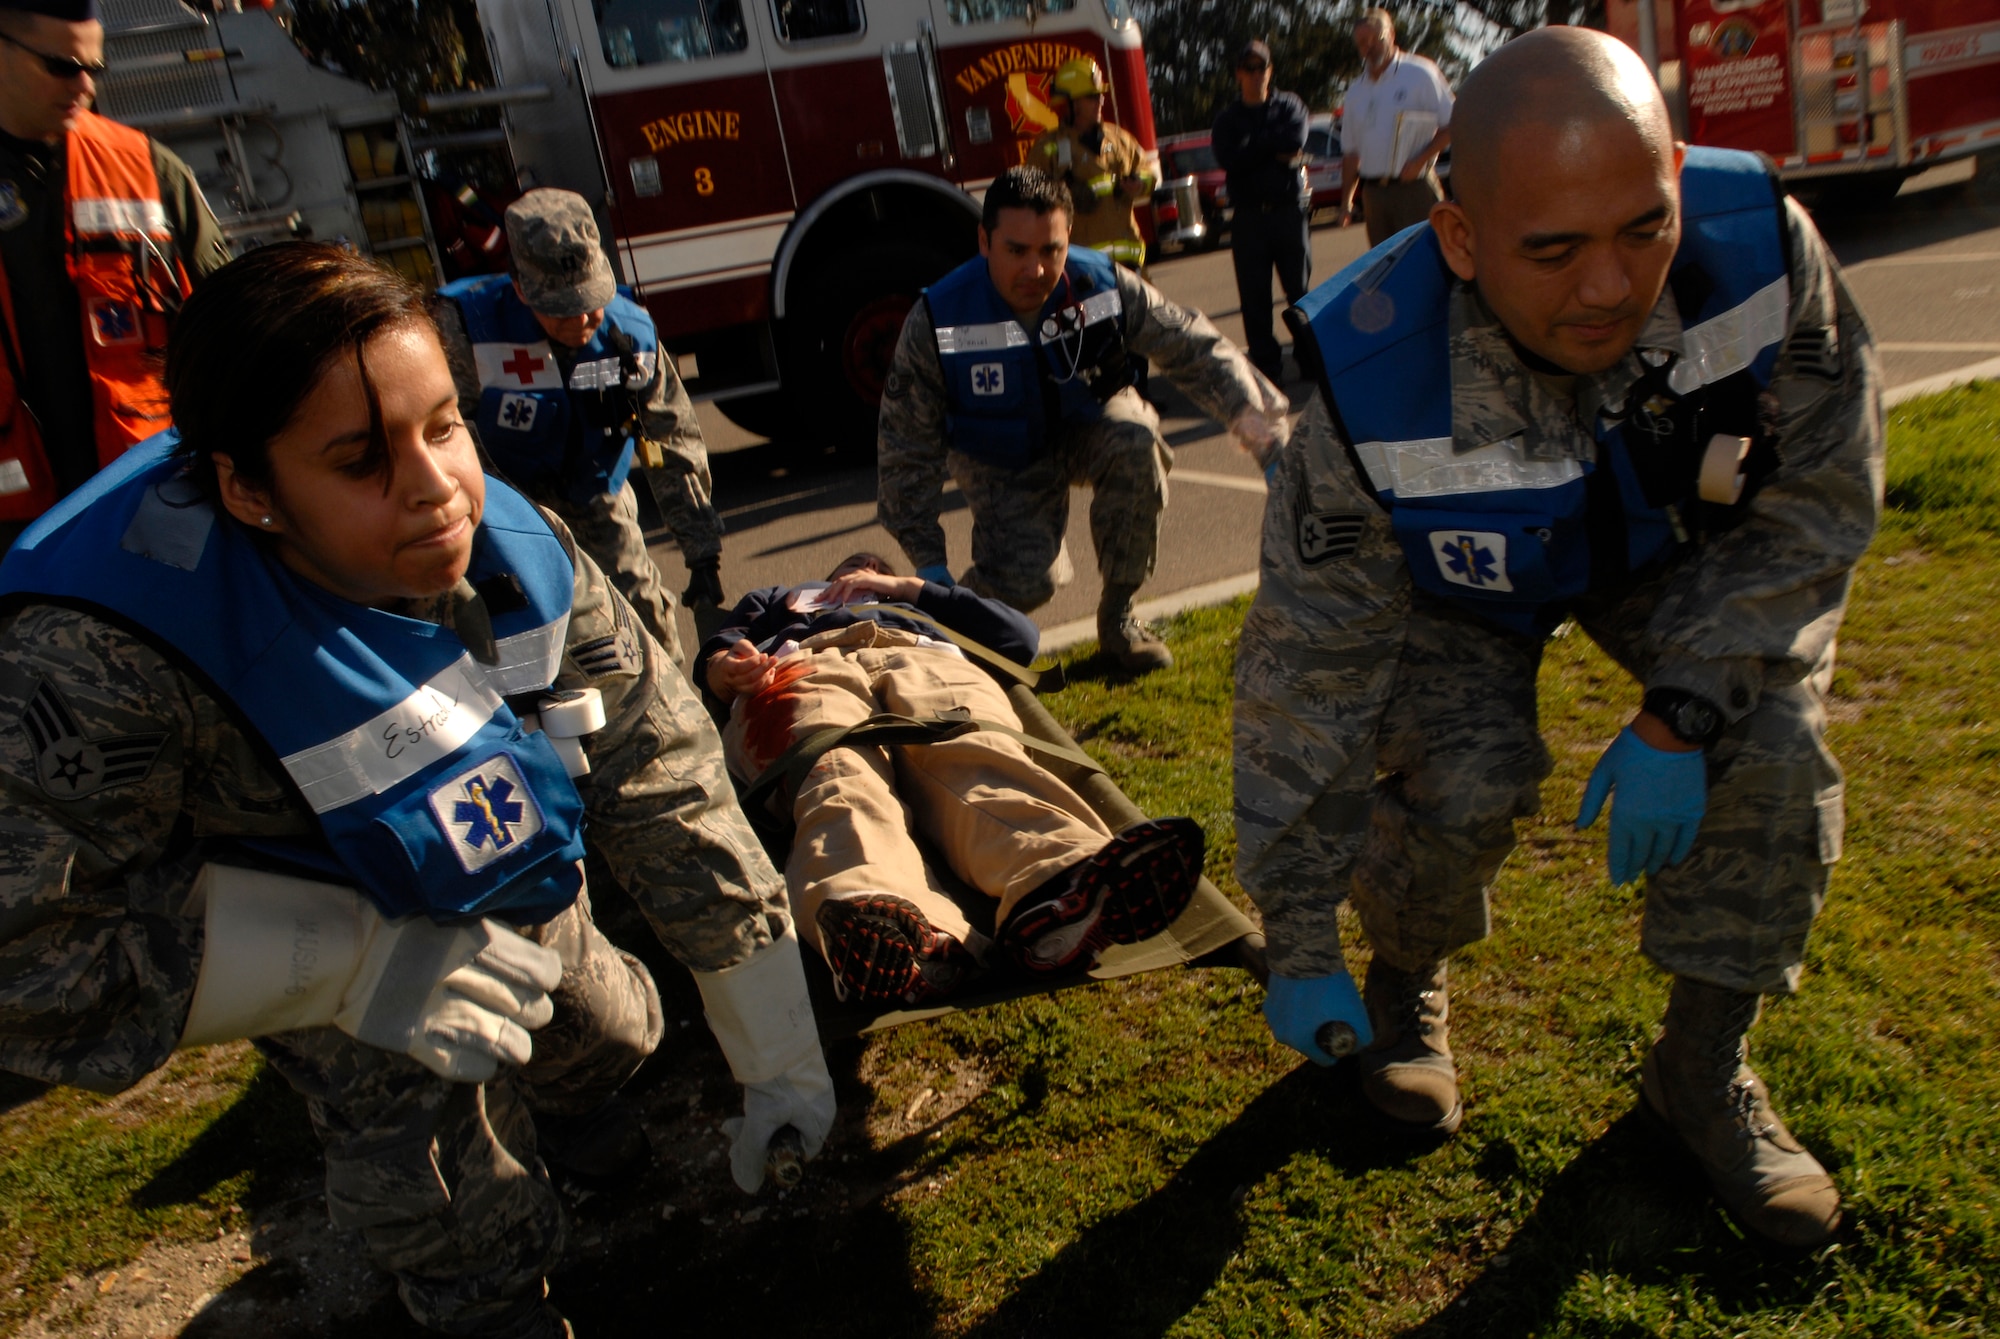 VANDENBERG AIR FORCE BASE, Calif. -- Airmen from the 30th Medical Group move an injured patient using a stretcher during the Medical Emergency Response Capabilities Assessment and Training exercise Jan. 29 here. The MERCAT is a training and exercise program designed to enhance the ability of Air Force Space Command Home Station Medical Response Teams to respond to chemical, biological, radiological or nuclear events. (U.S. Air Force photo/Senior Airman Christian Thomas)